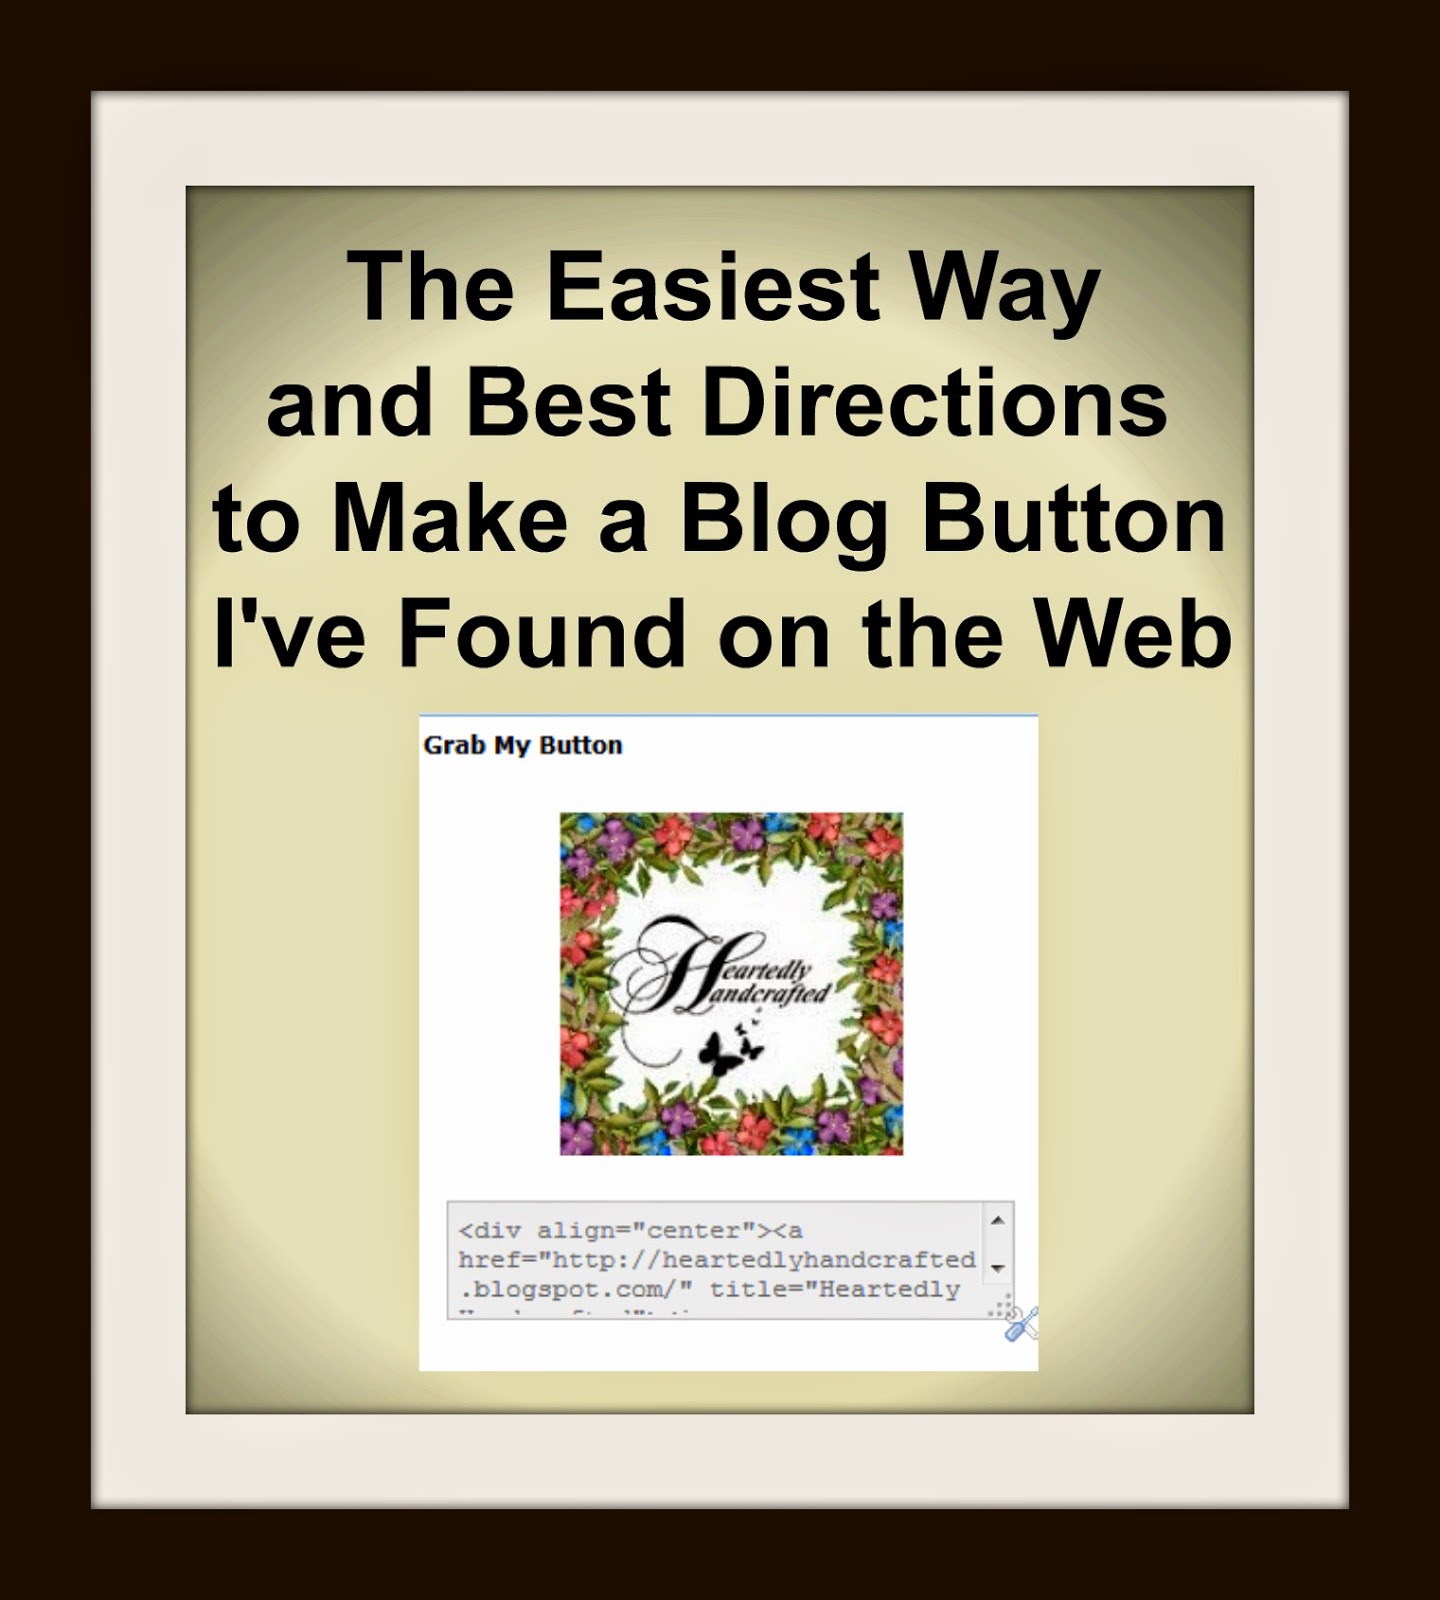 The Easiest Way and Best Directions to Make a Blog Button I've Found on the Web